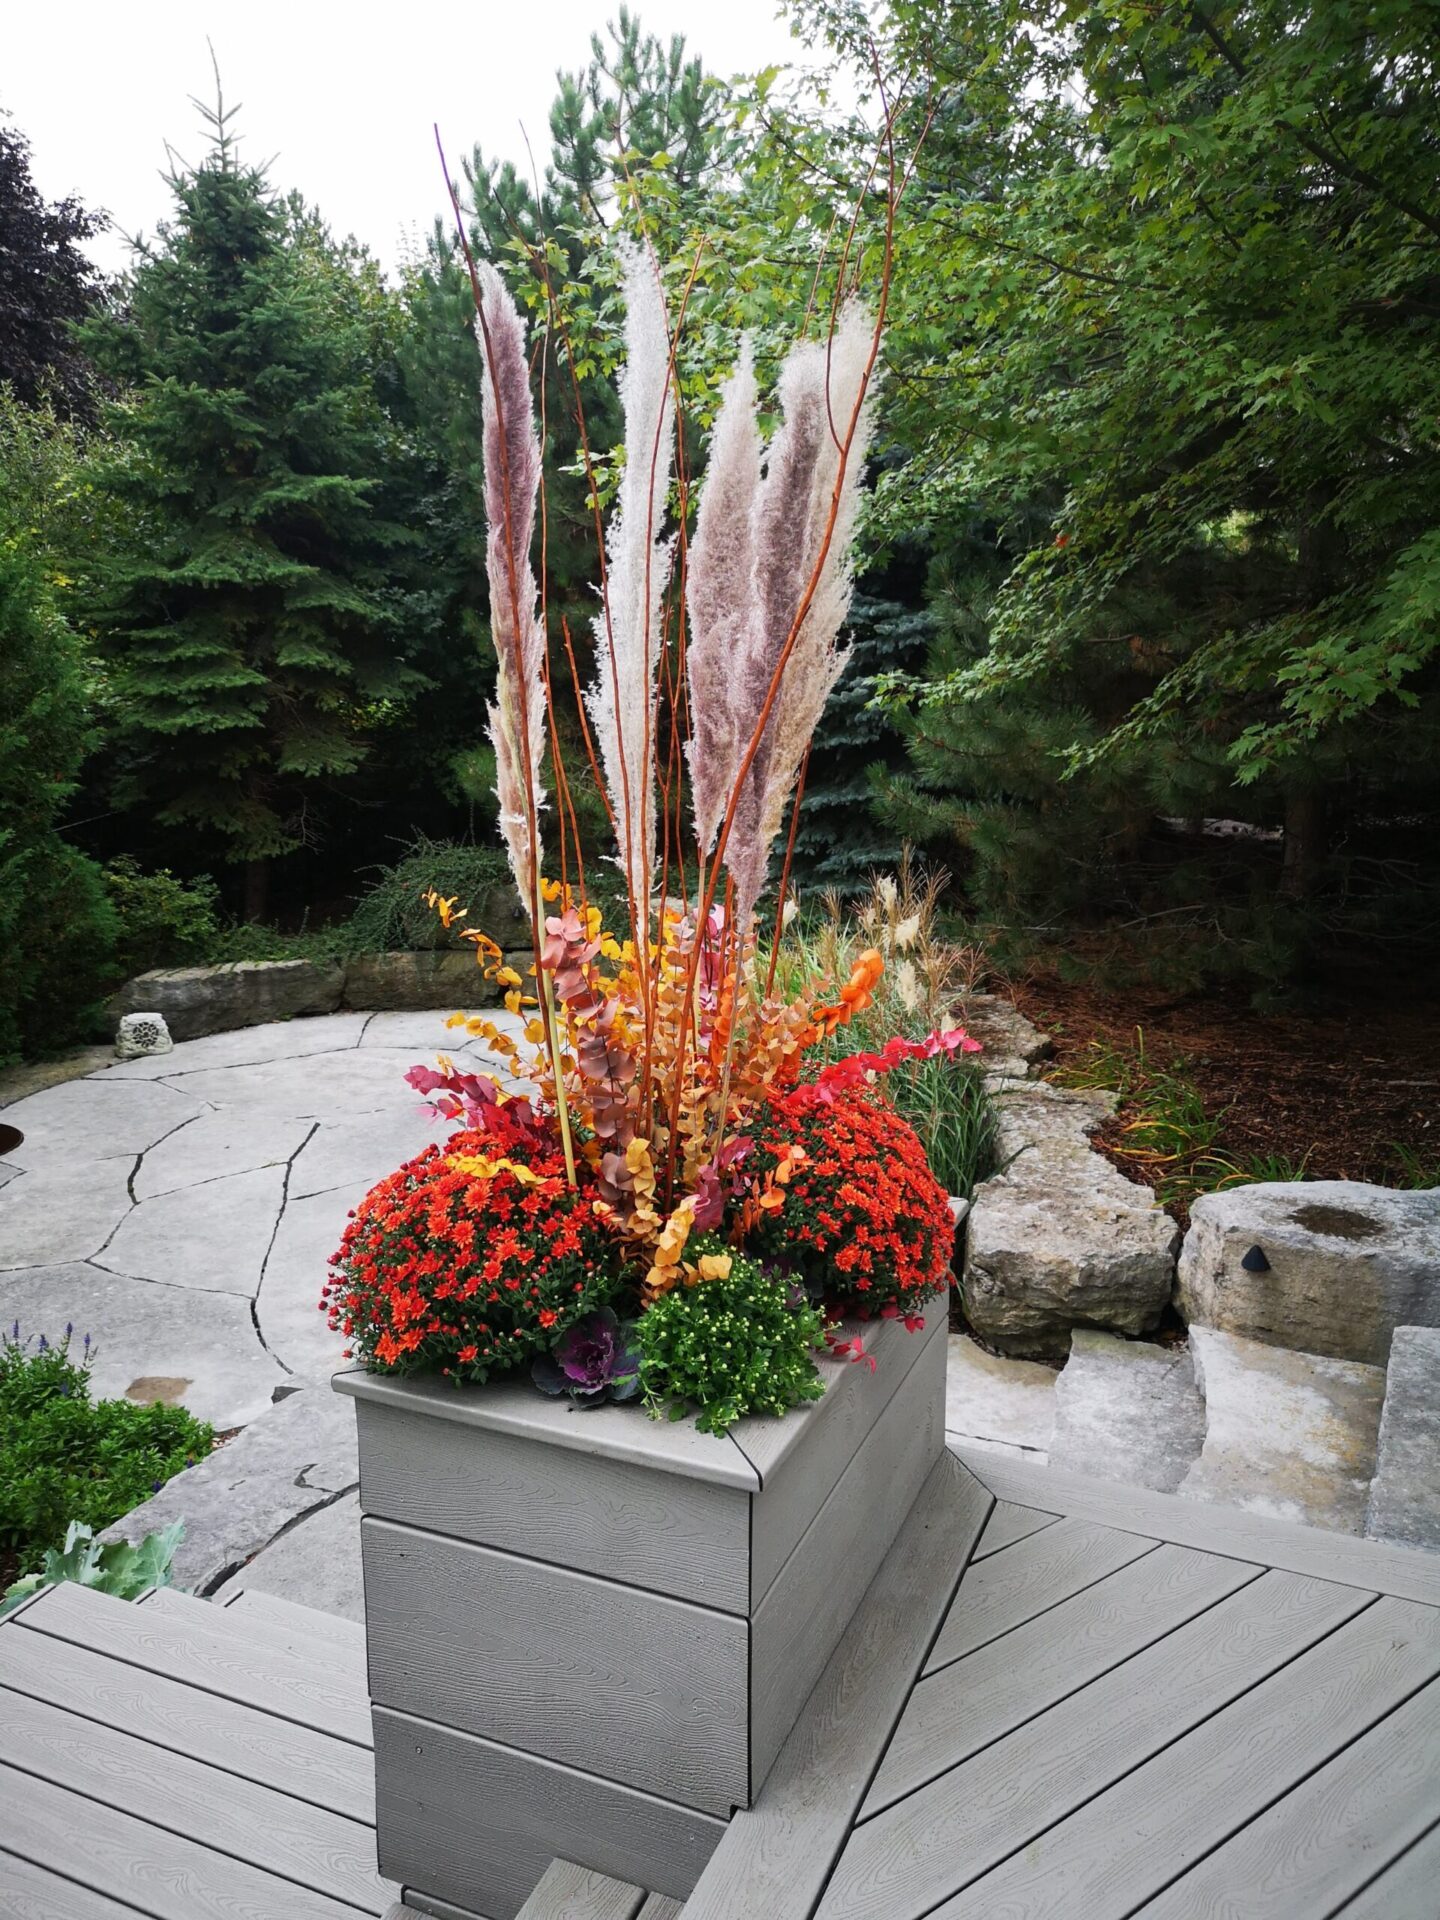 This image features a vibrant floral arrangement in a gray planter on a wooden deck with tall trees and a stone pathway in the background.